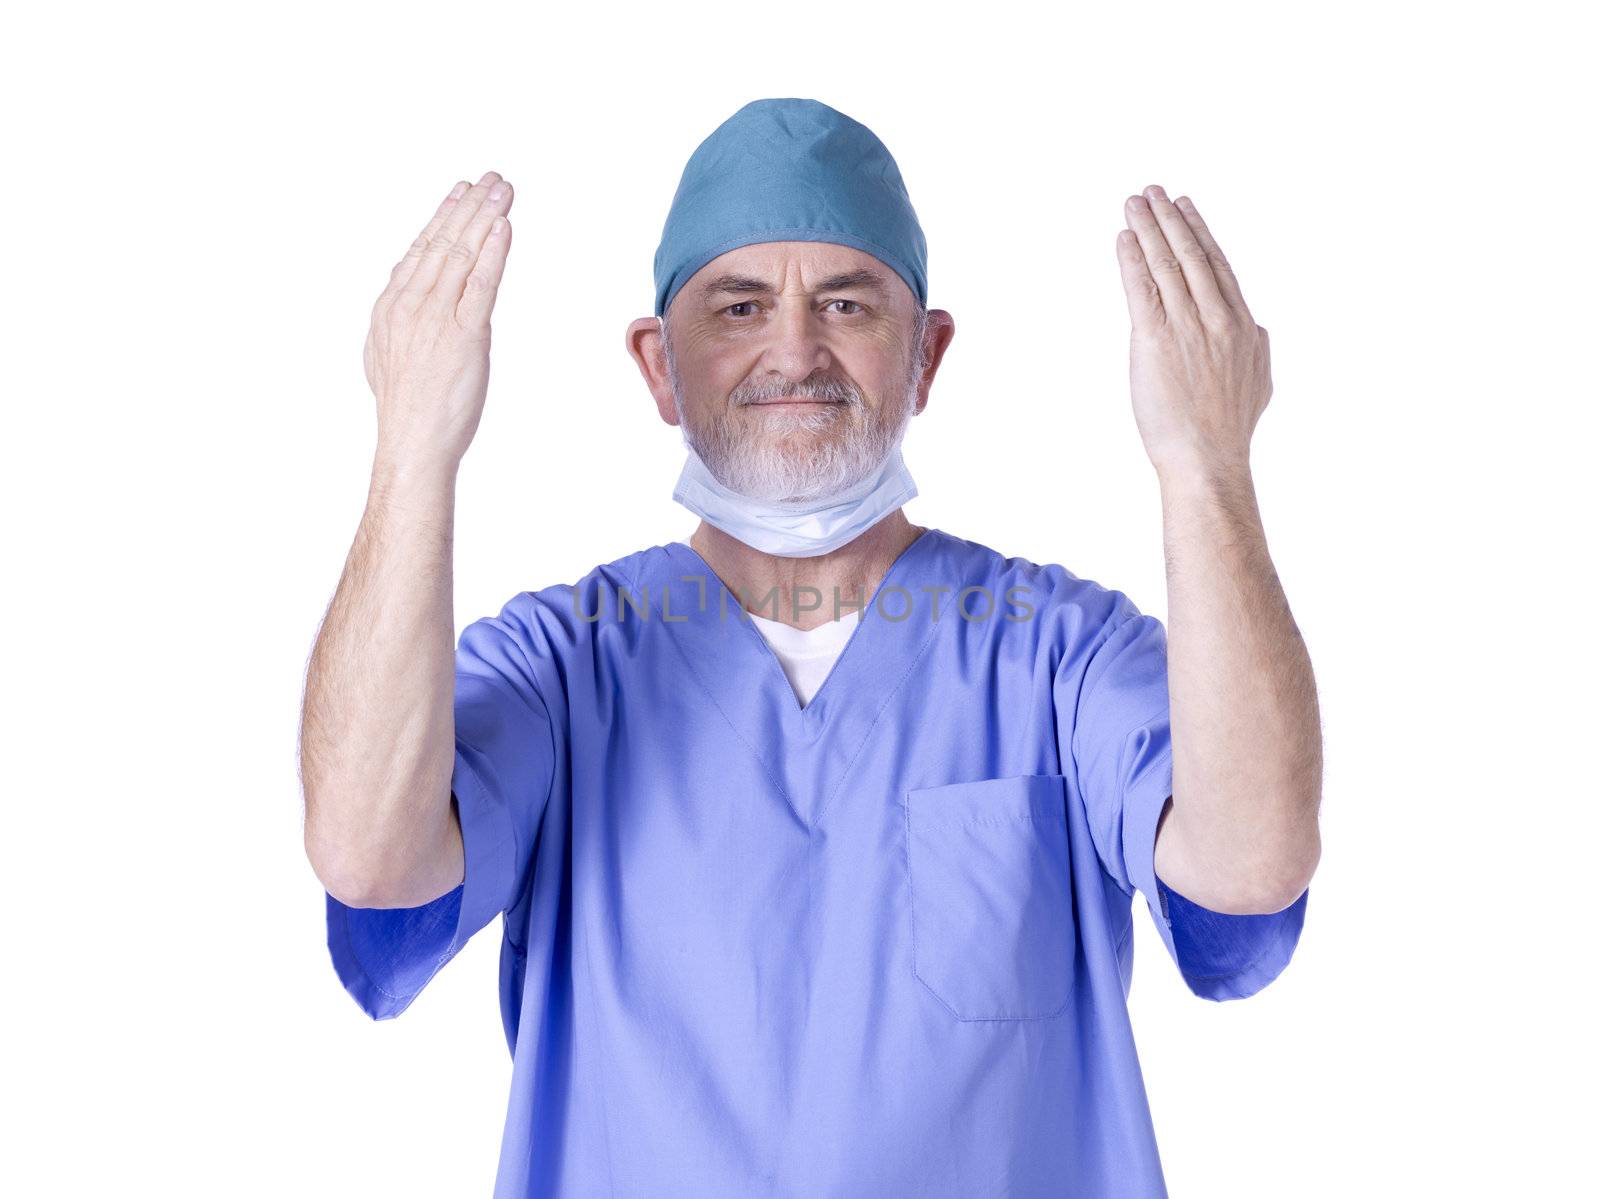 Horizontal image of a surgeon doctor showing his clean hands against white background